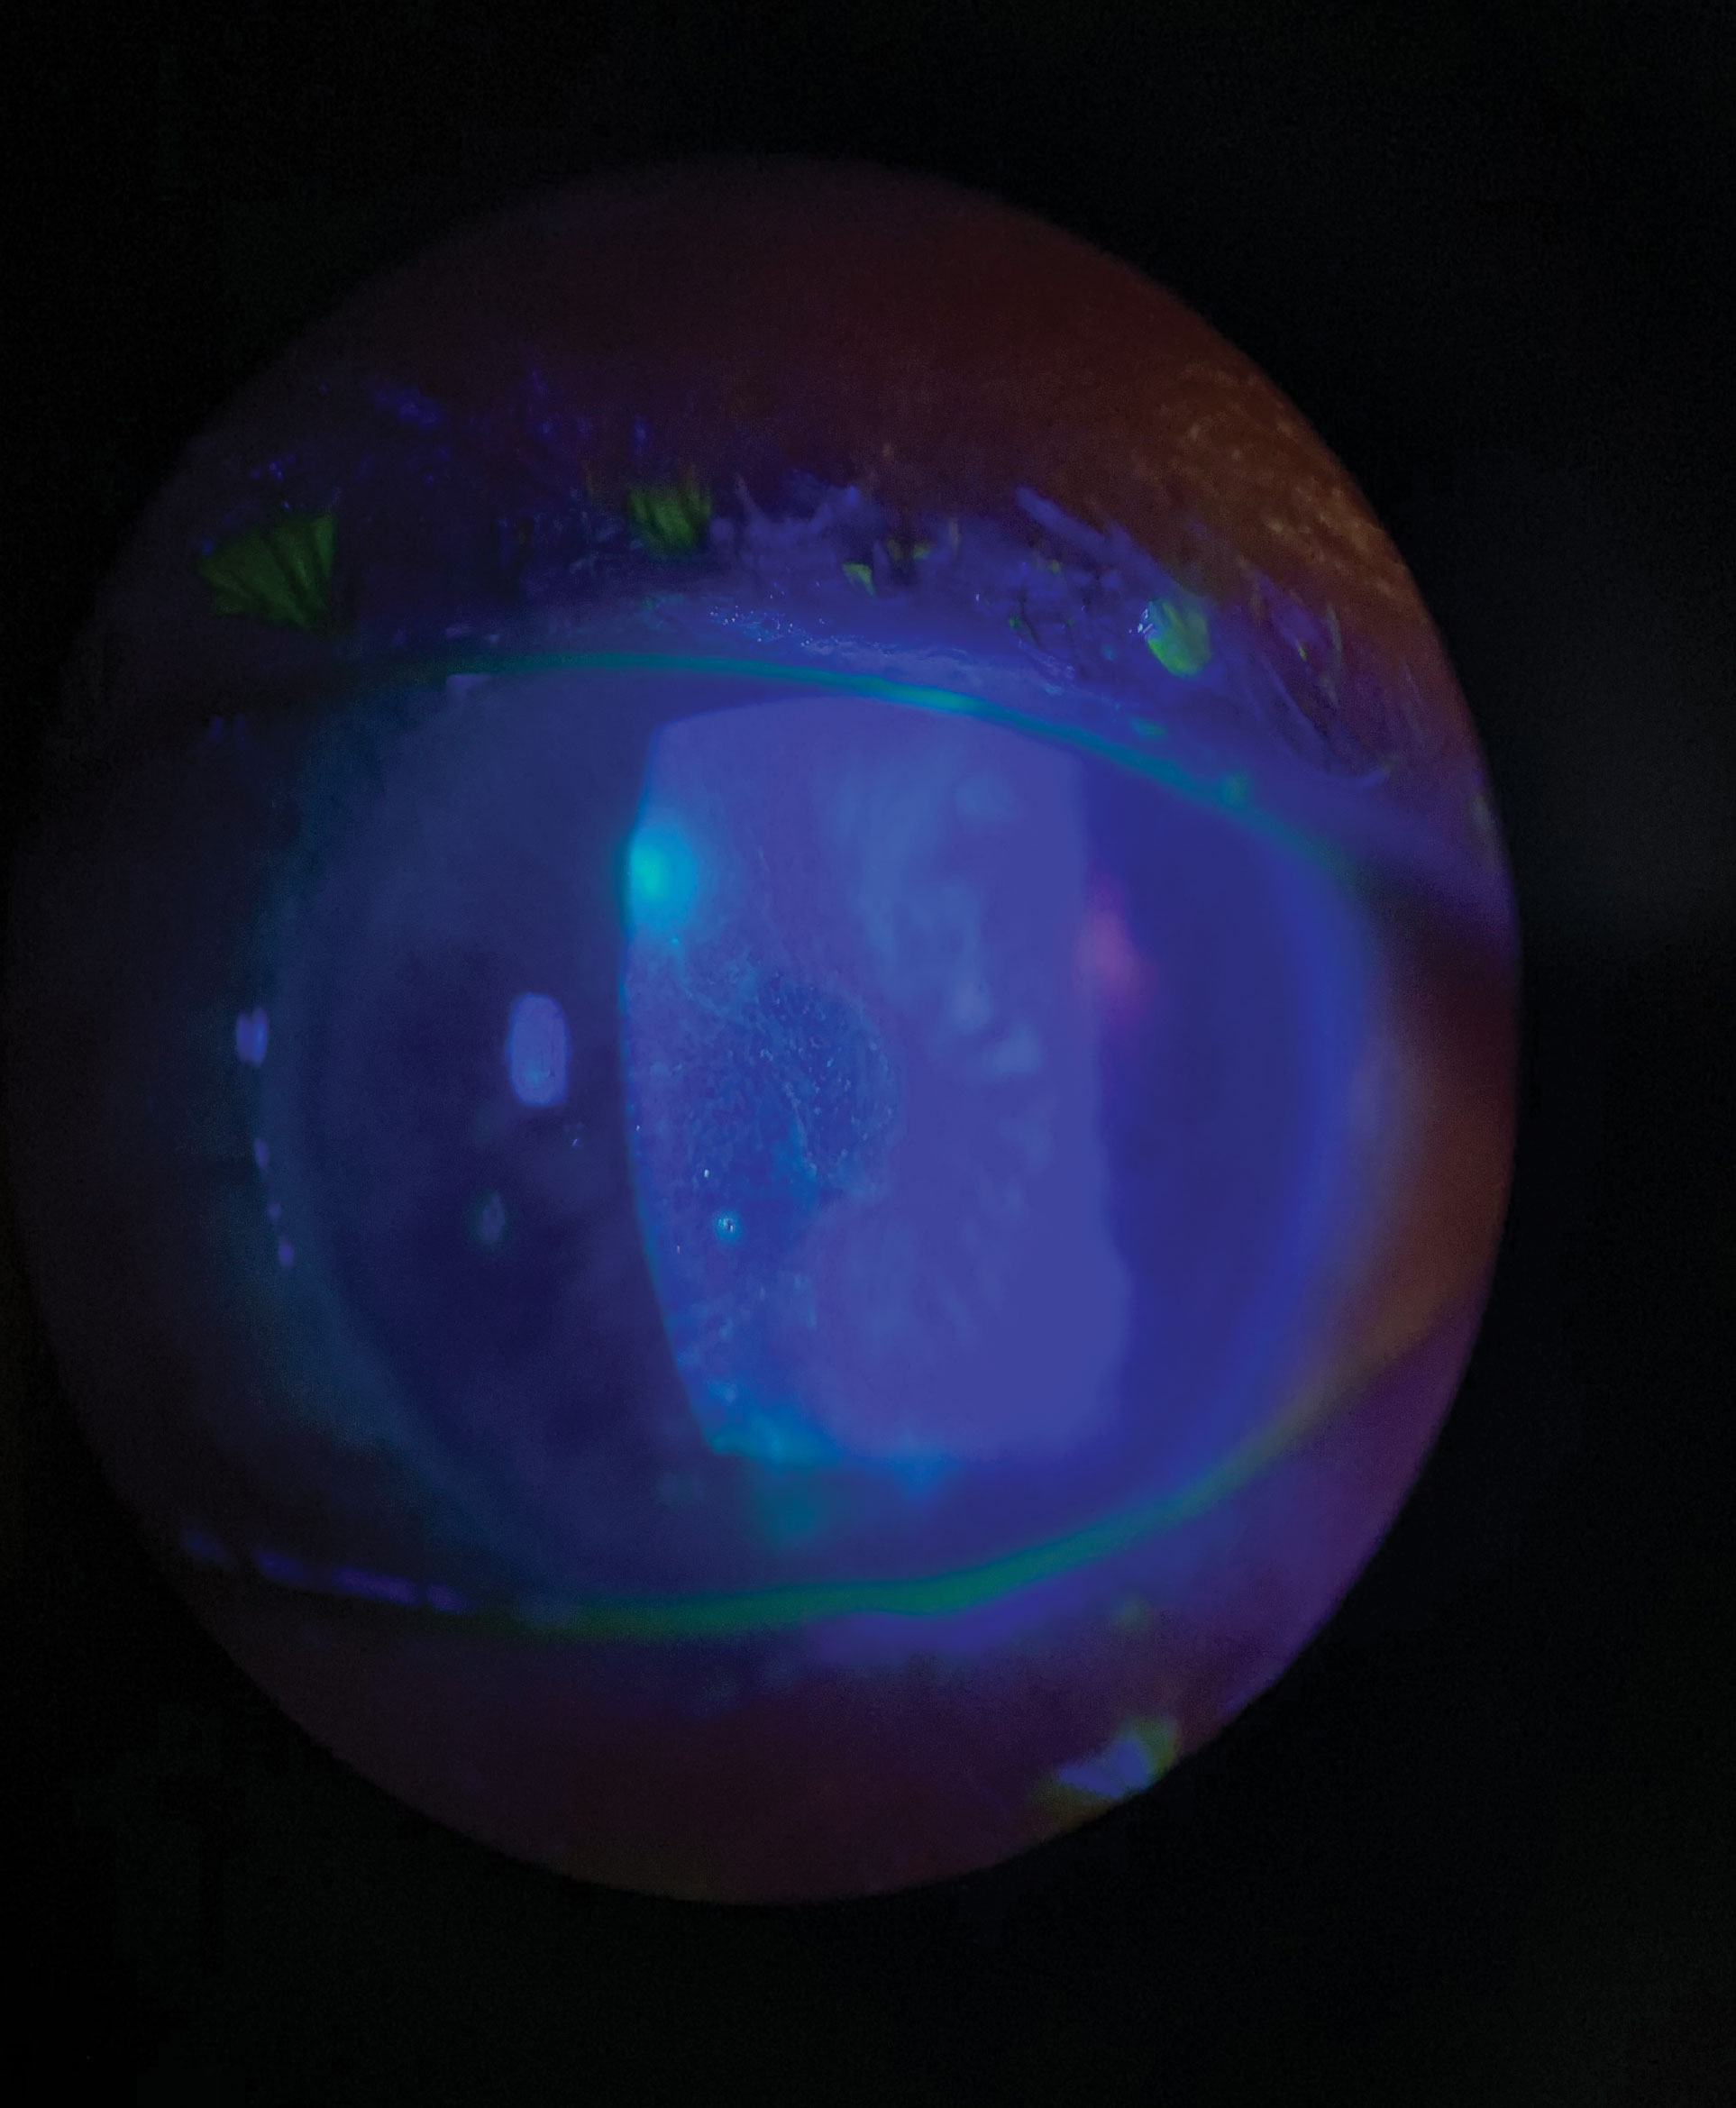 A resolving central dendrite with multifocal stromal keratitis with ulceration in a patient with an aggressive form of ocular HSVK who is recovering from COVID-19.